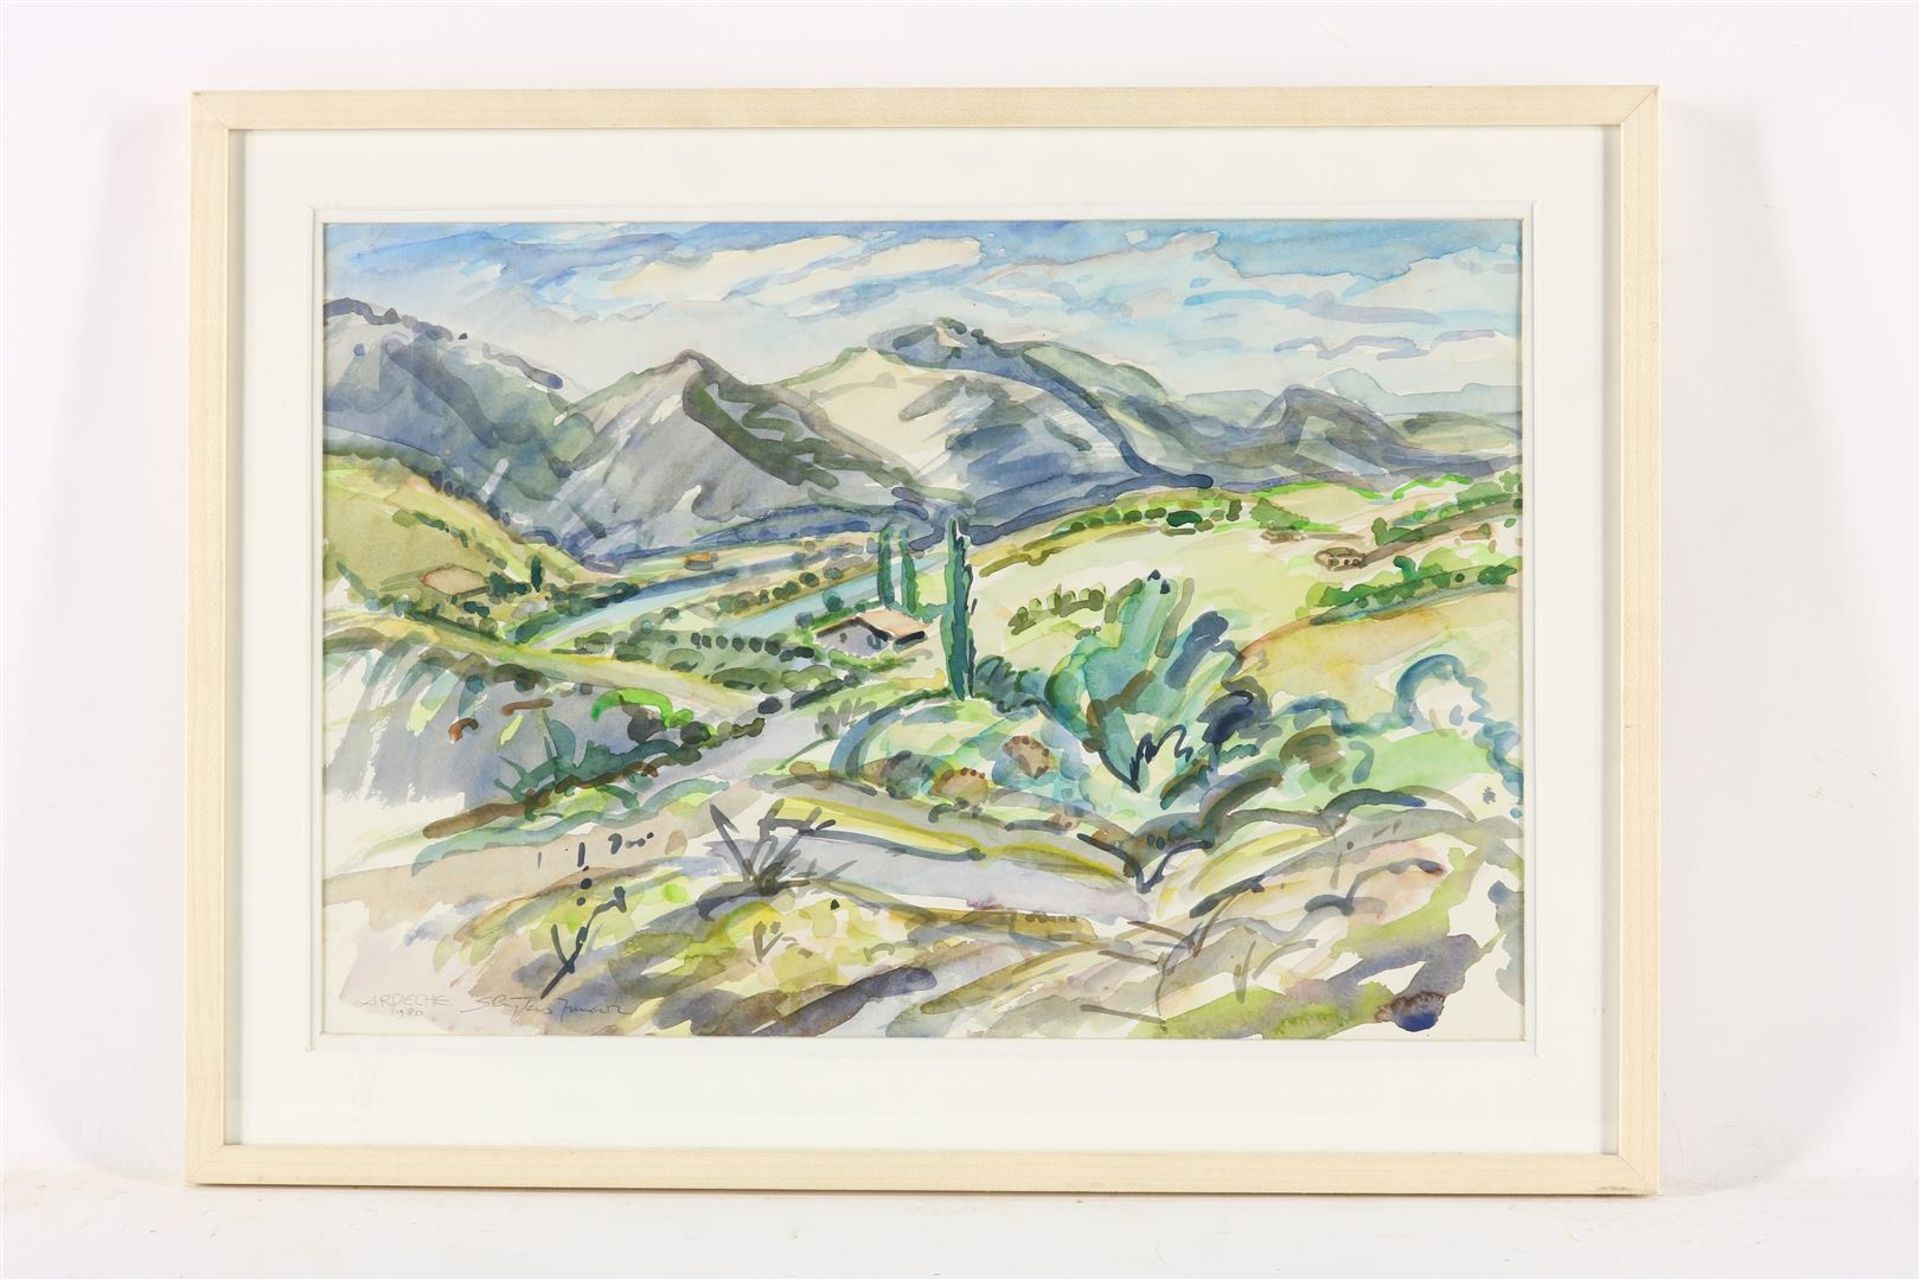 Jan Sluijters jr. (1914-2005) French landscape in Ardeche, signed and dated 1980 lower left. - Image 2 of 4